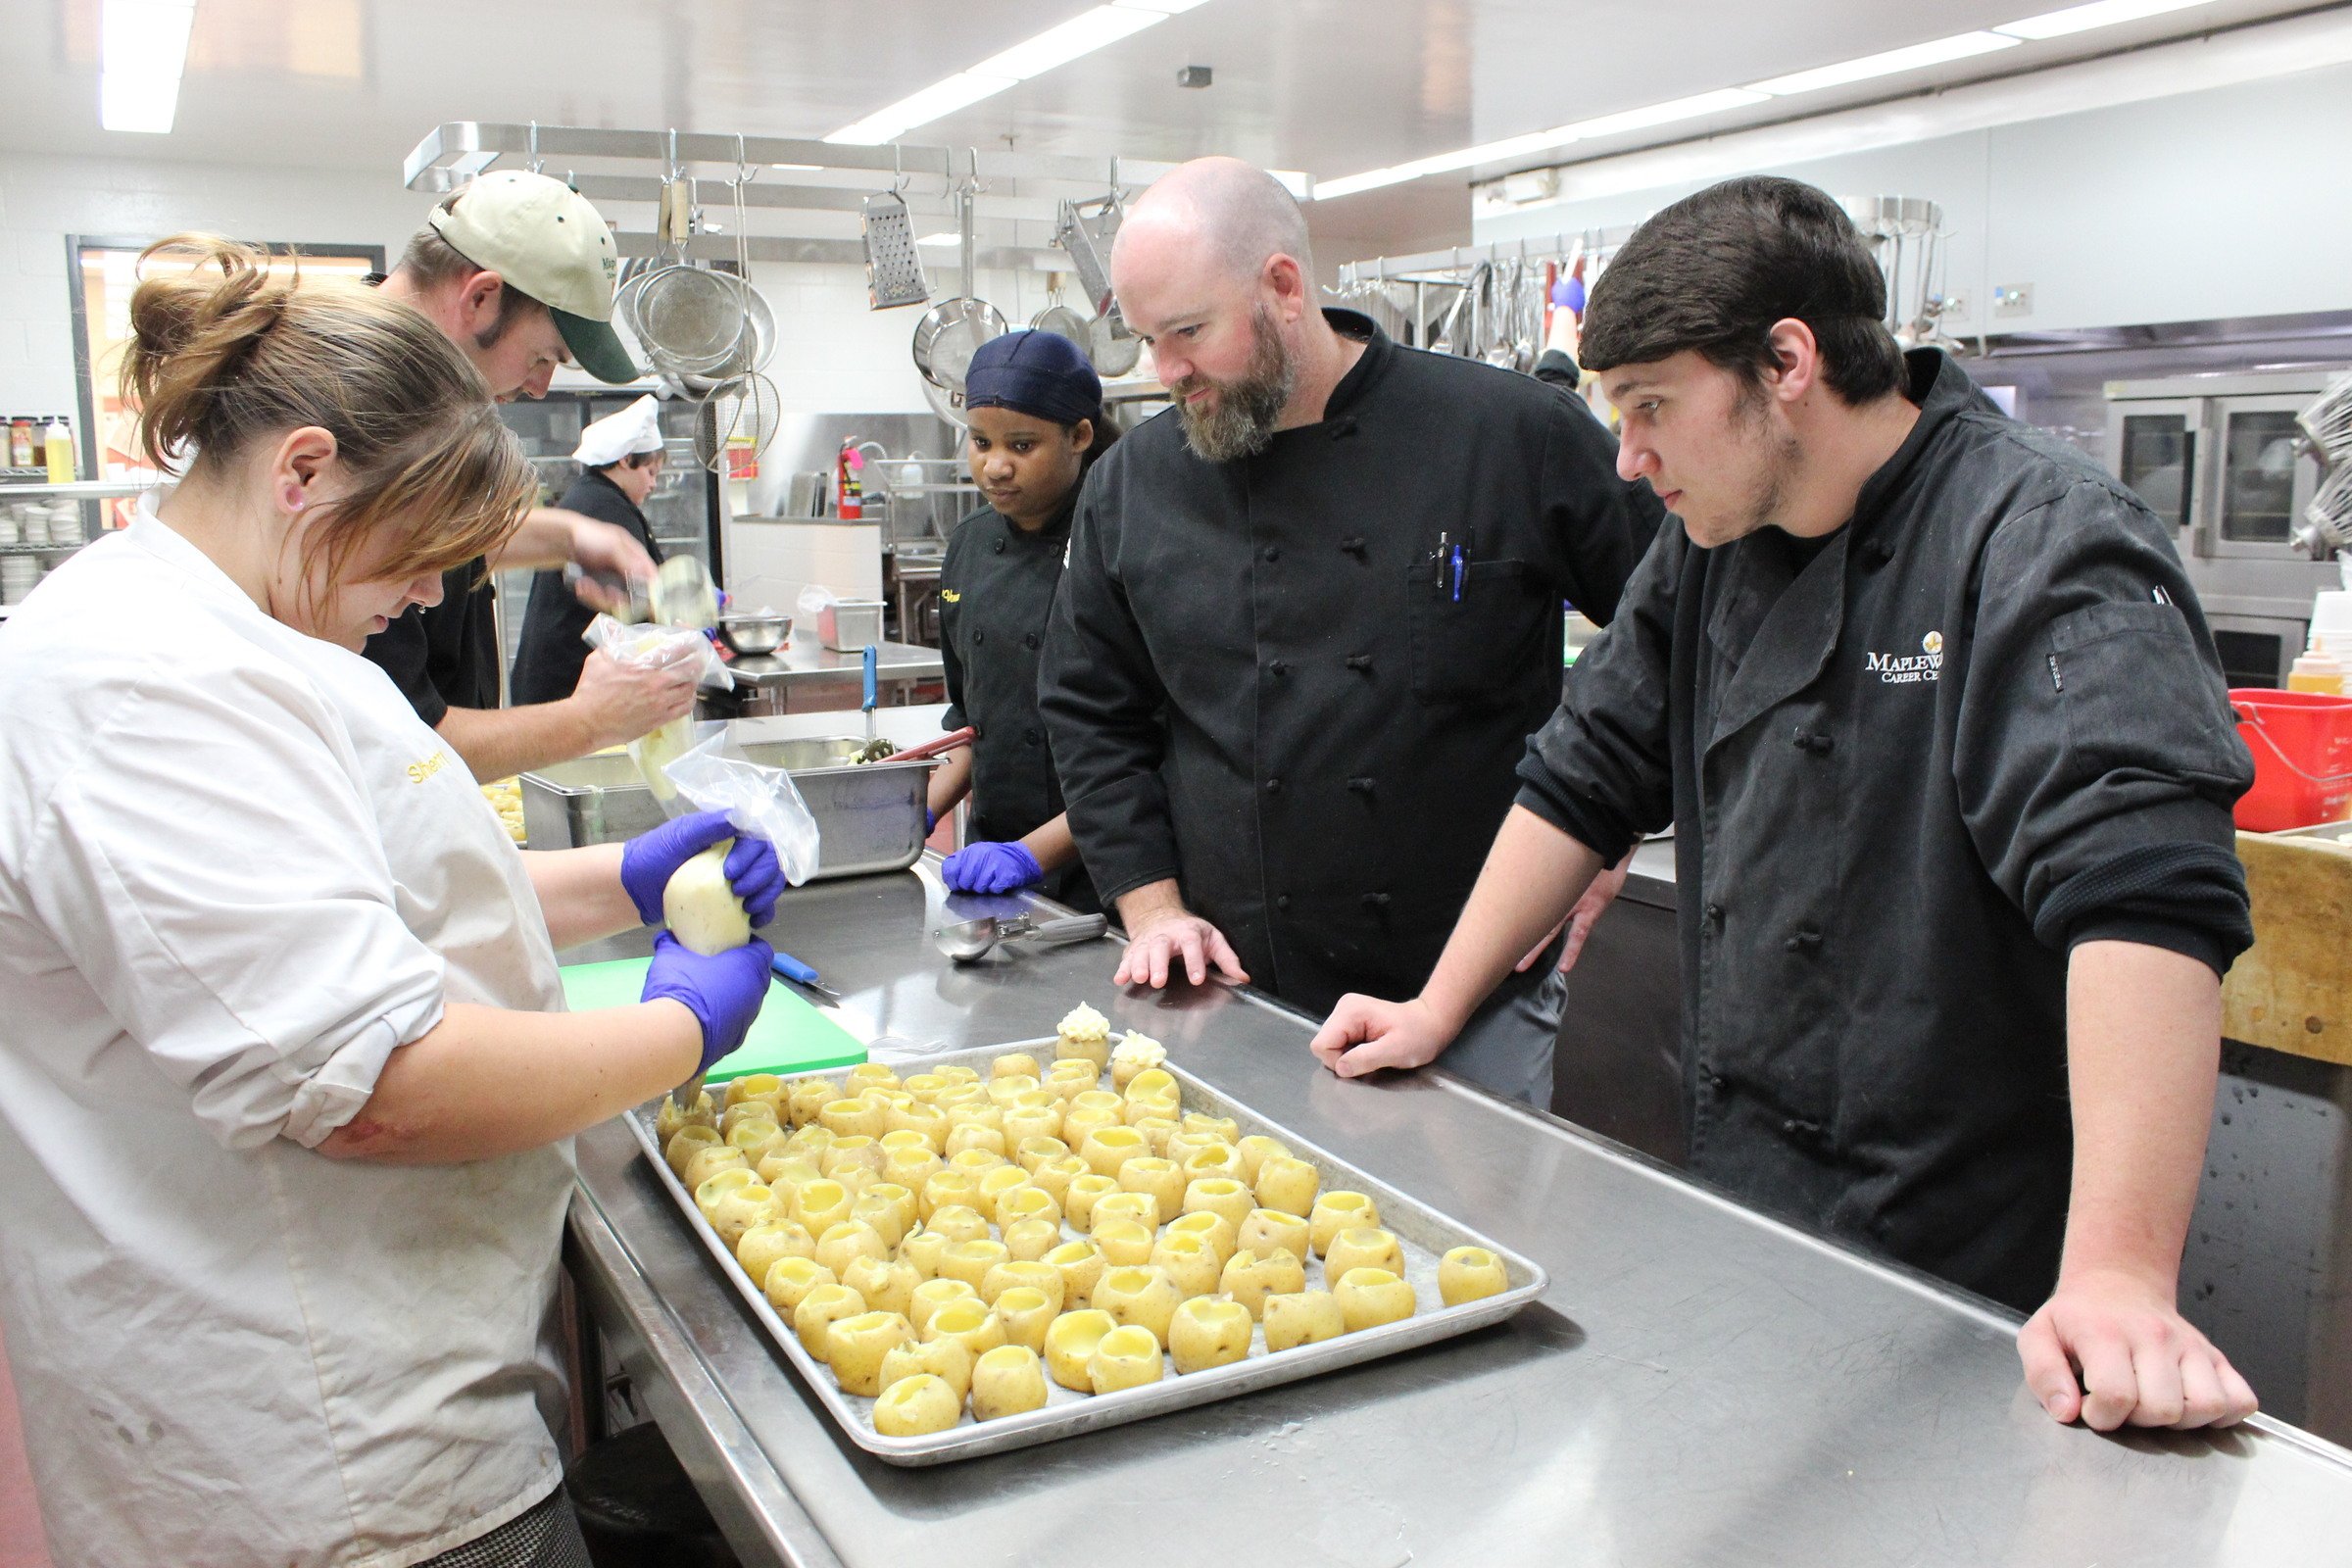 Chef Buckles in lab with students